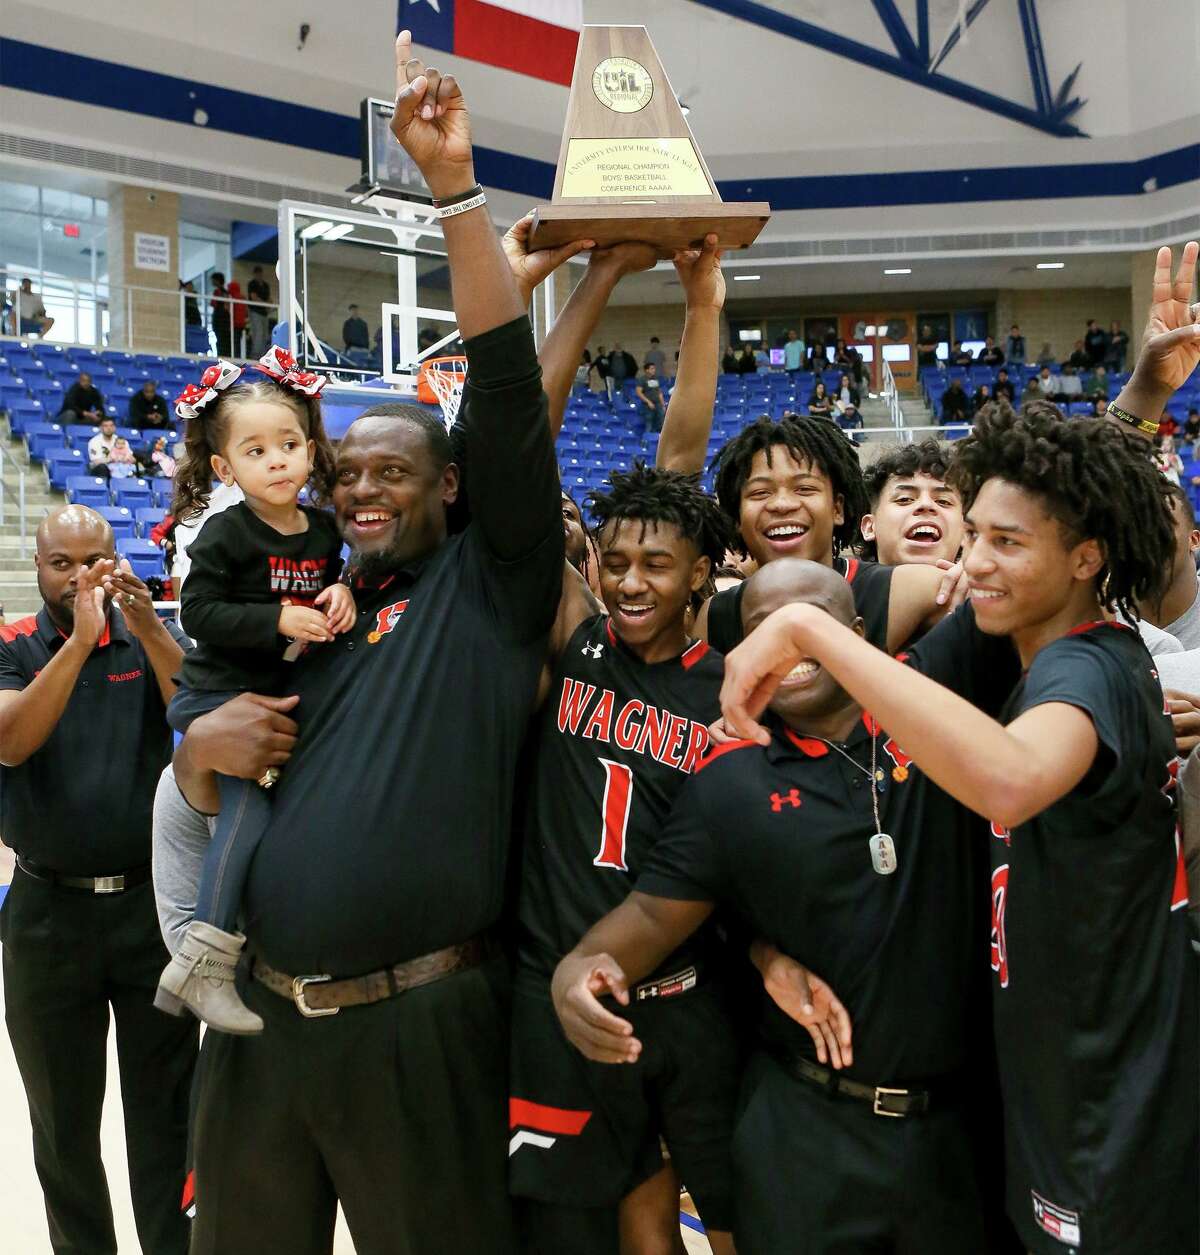 Wagner coach Rodney Clark and the Wagner Thunderbirds celebrate with their 5A regional championship win over Harlan at Northside Gym on March 7, 2020.